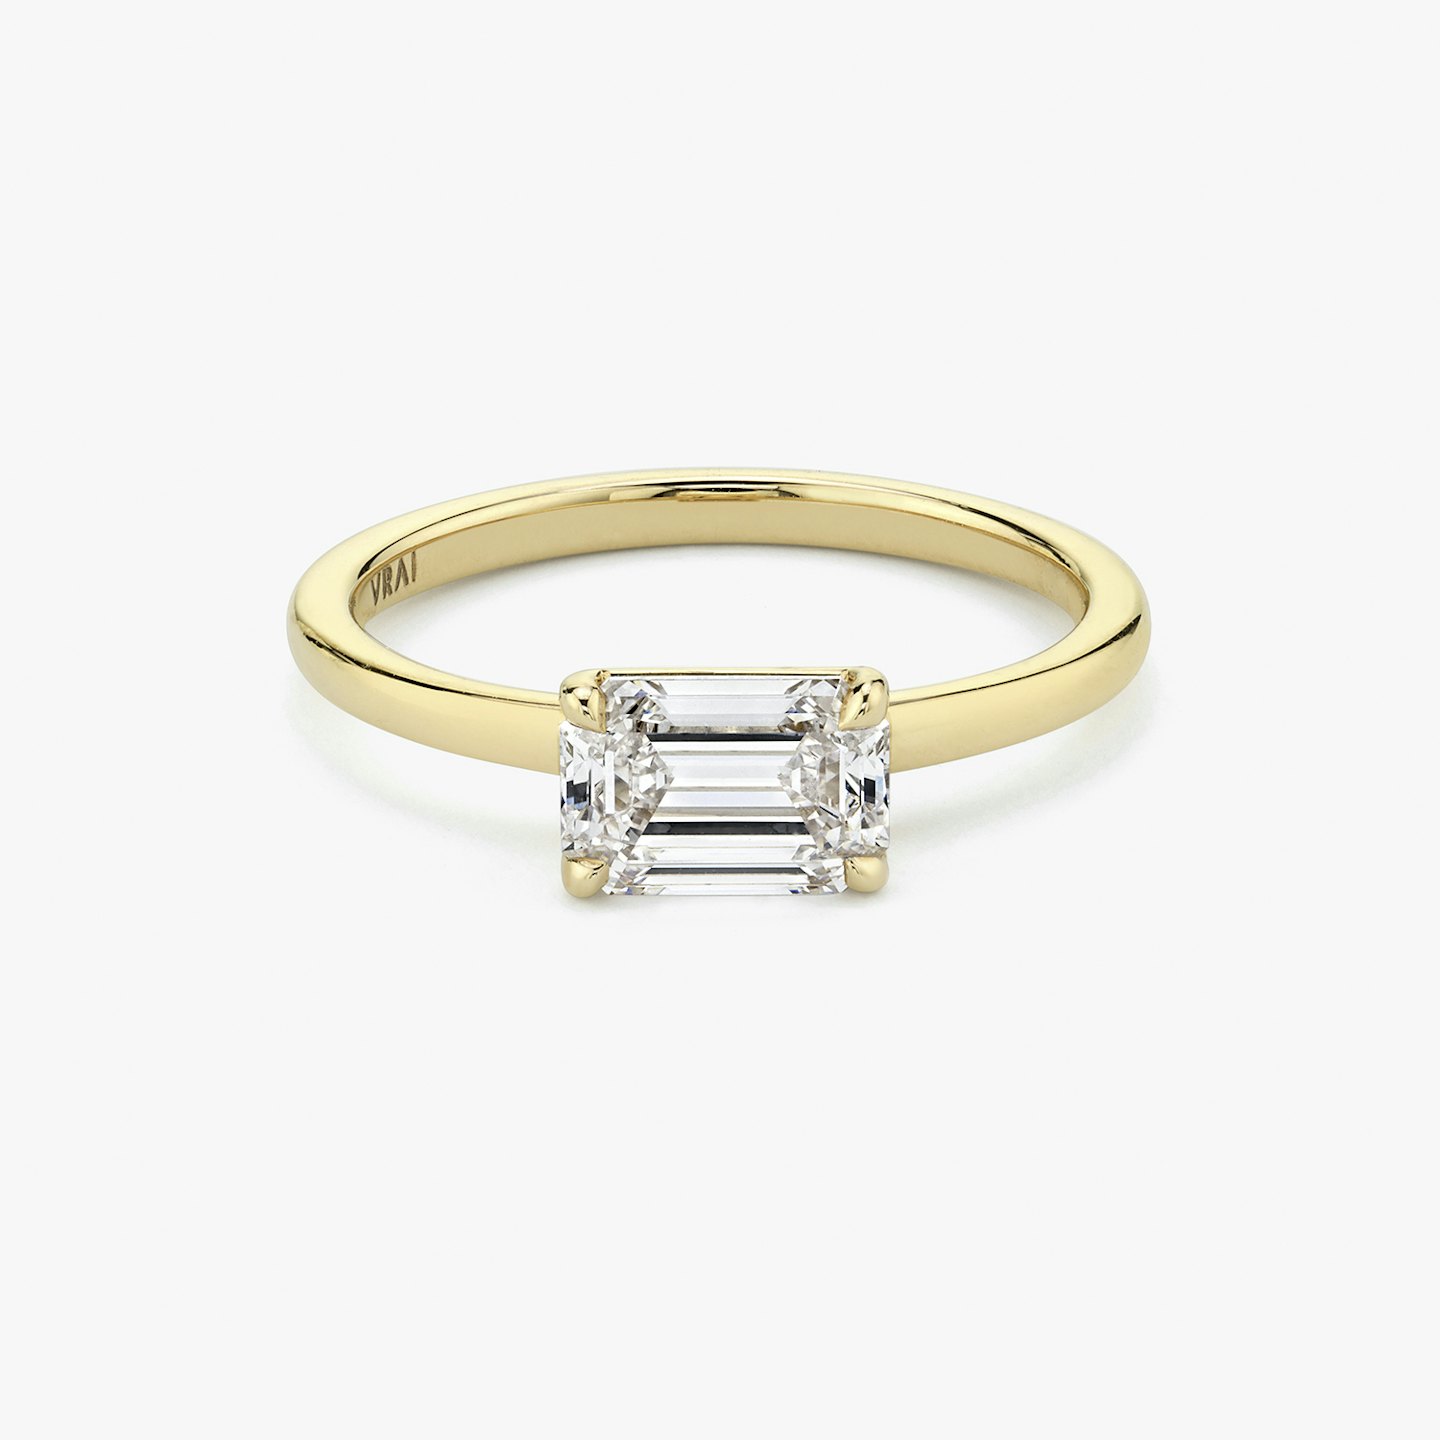 Signature prong East West emerald cut engagement ring